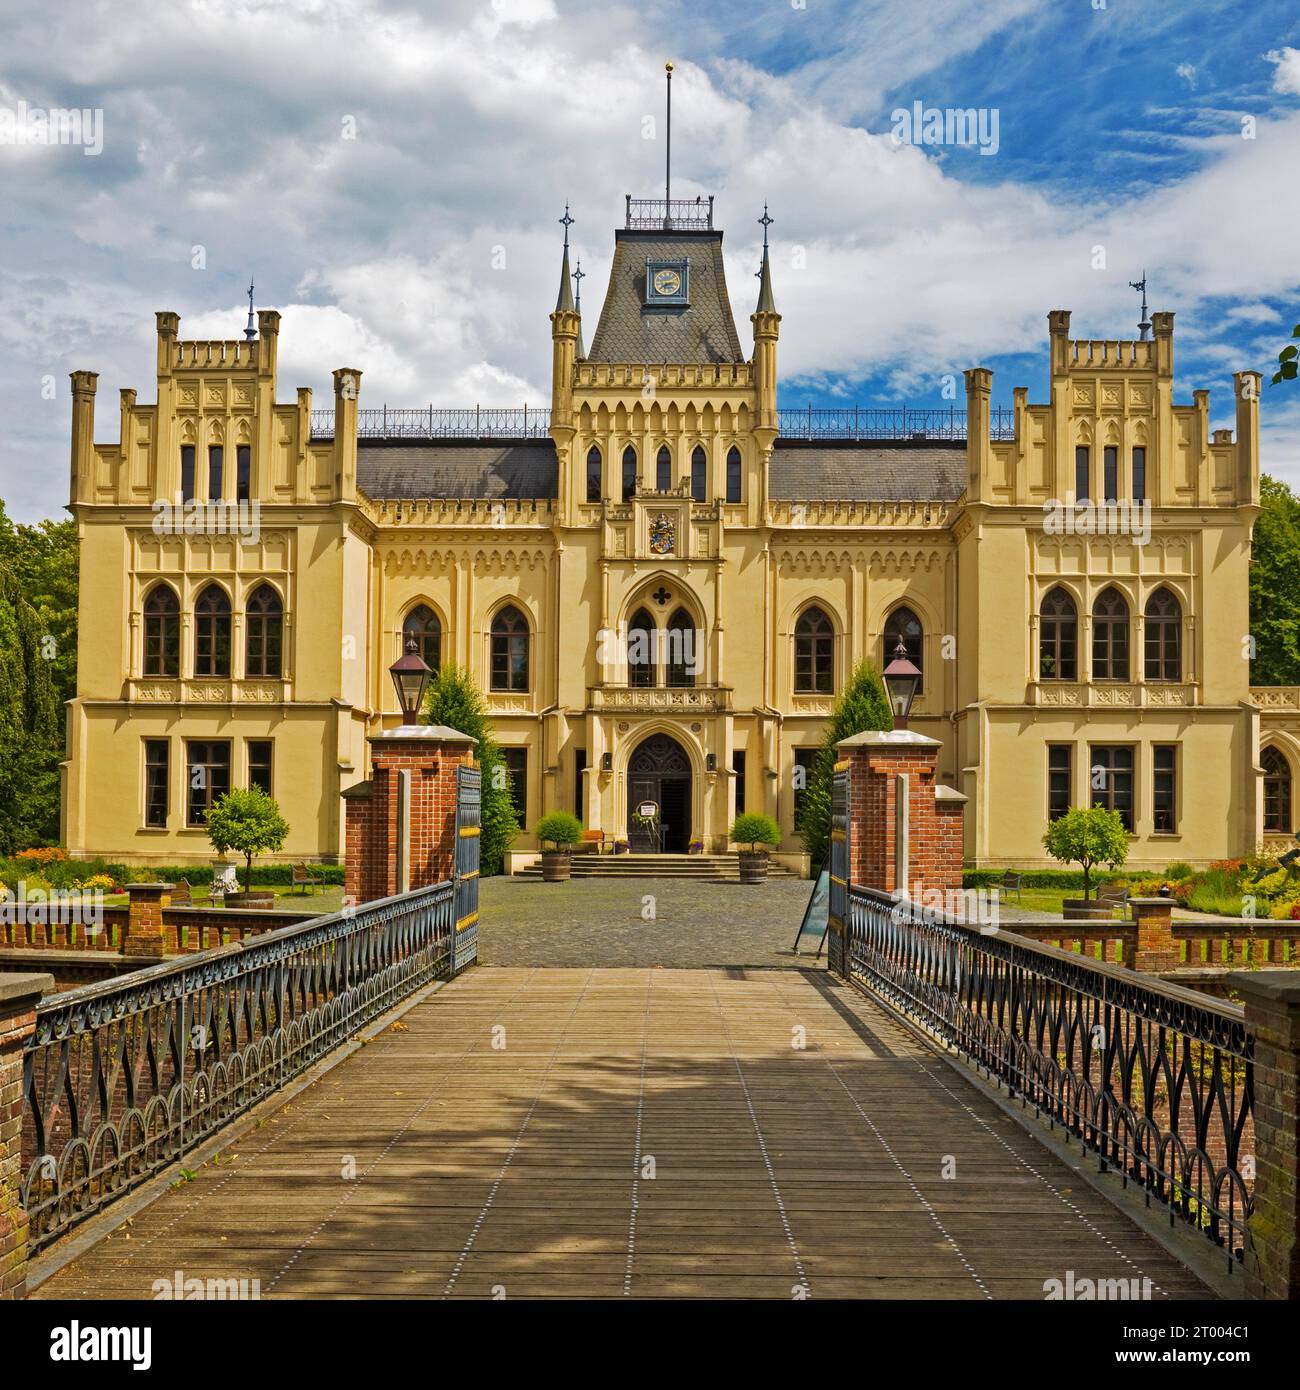 Evenburg moated castle, restored in the neo-Gothic style, Leer, Lower Saxony, Germany, Europe Stock Photo